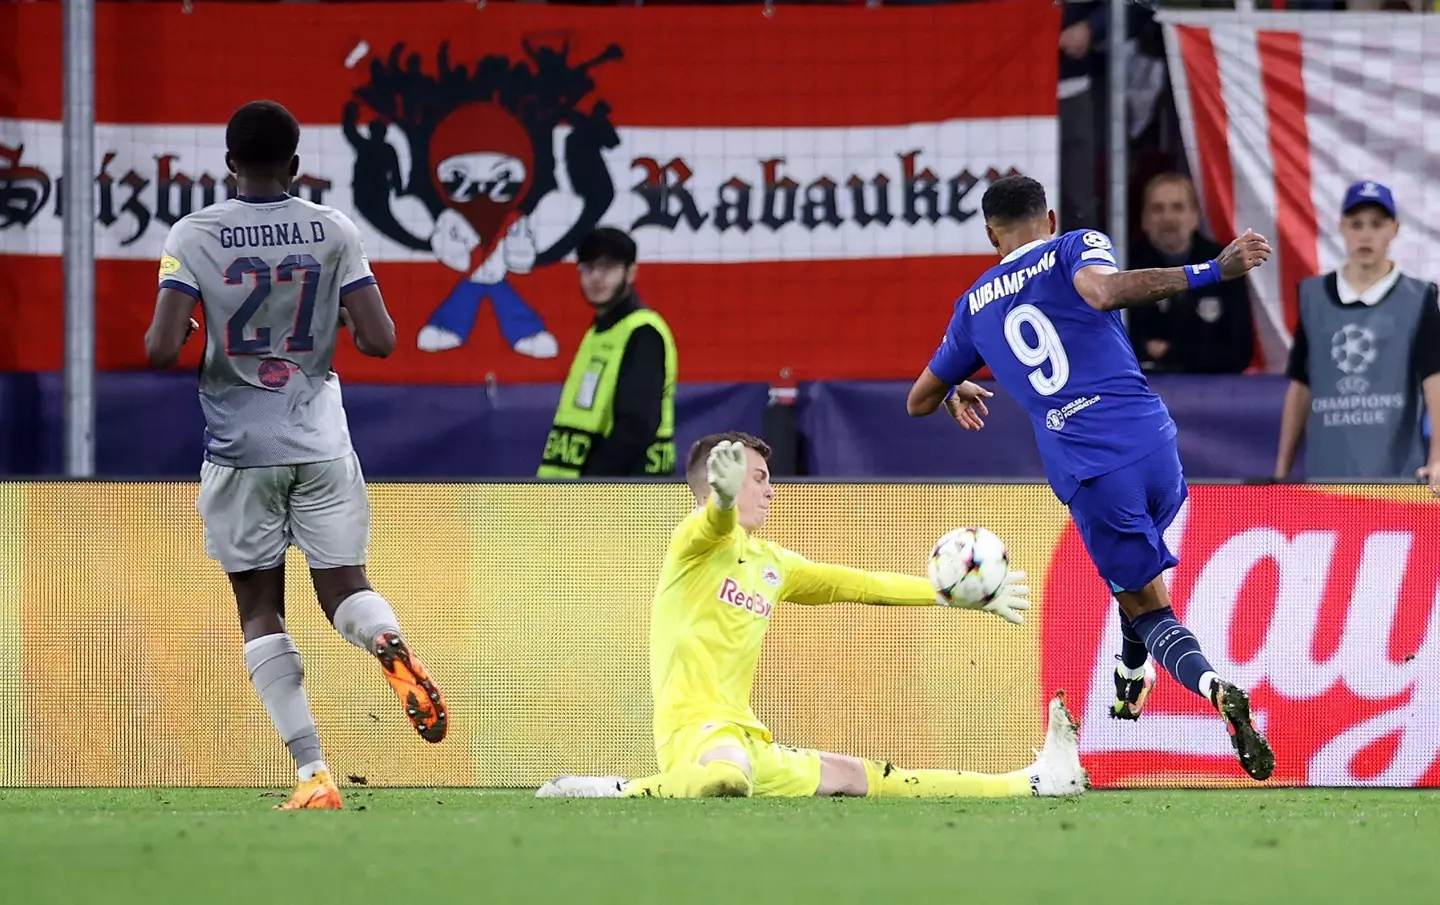 Chelsea's Pierre-Emerick Aubameyang (right) attempts a shot on goal during the UEFA Champions League group E match at the Red Bull Arena in Salzburg. (Alamy)